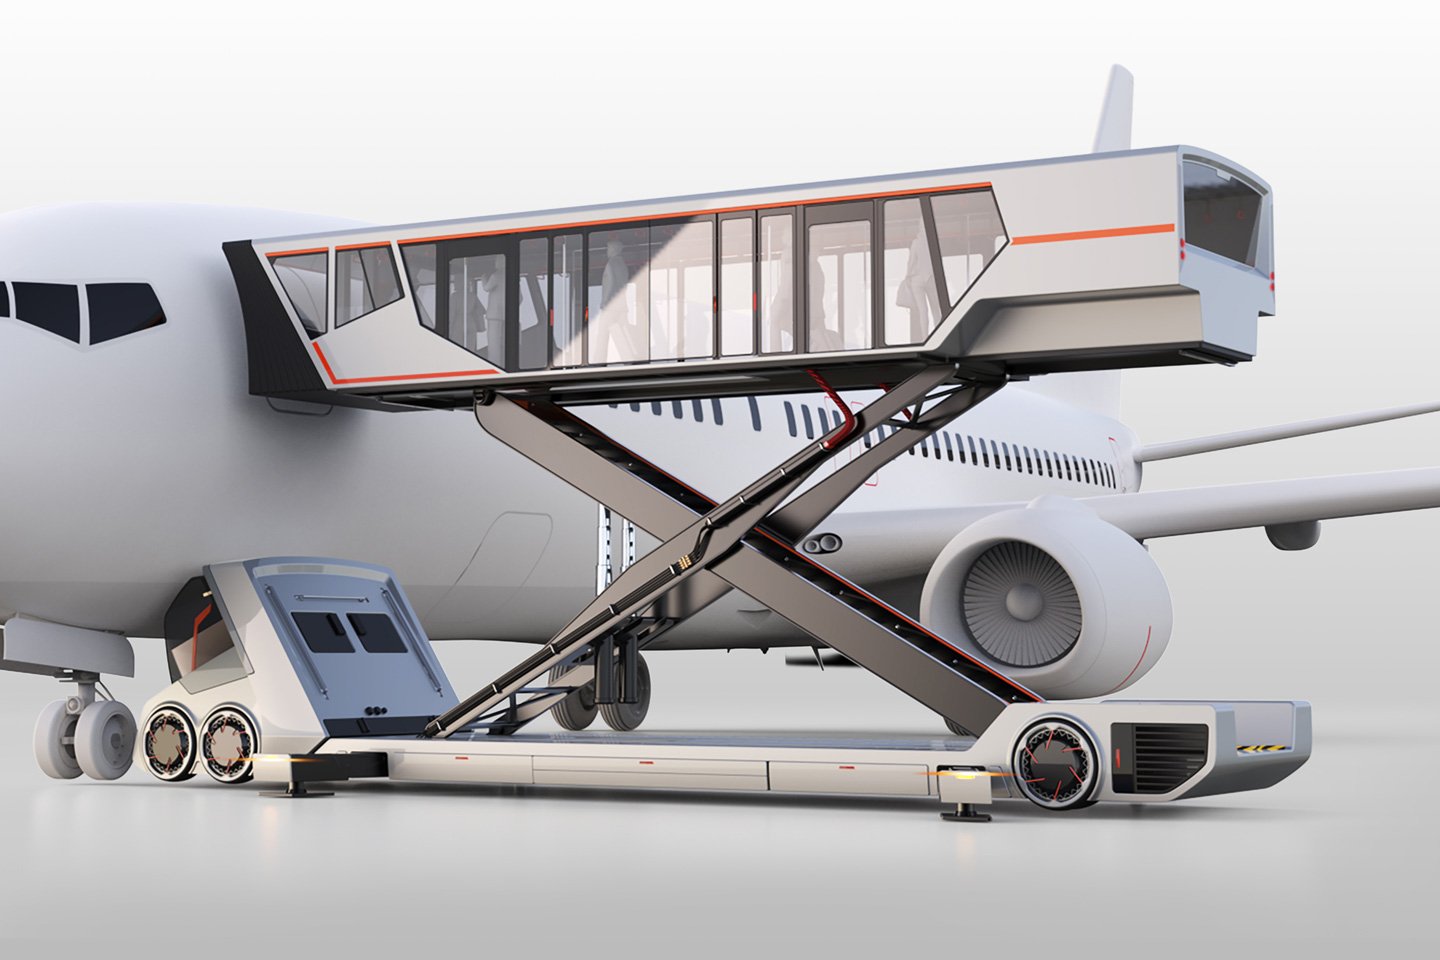 This hydraulic bus lifts its entire cabin upwards to let passengers directly enter their flight - Yanko Design